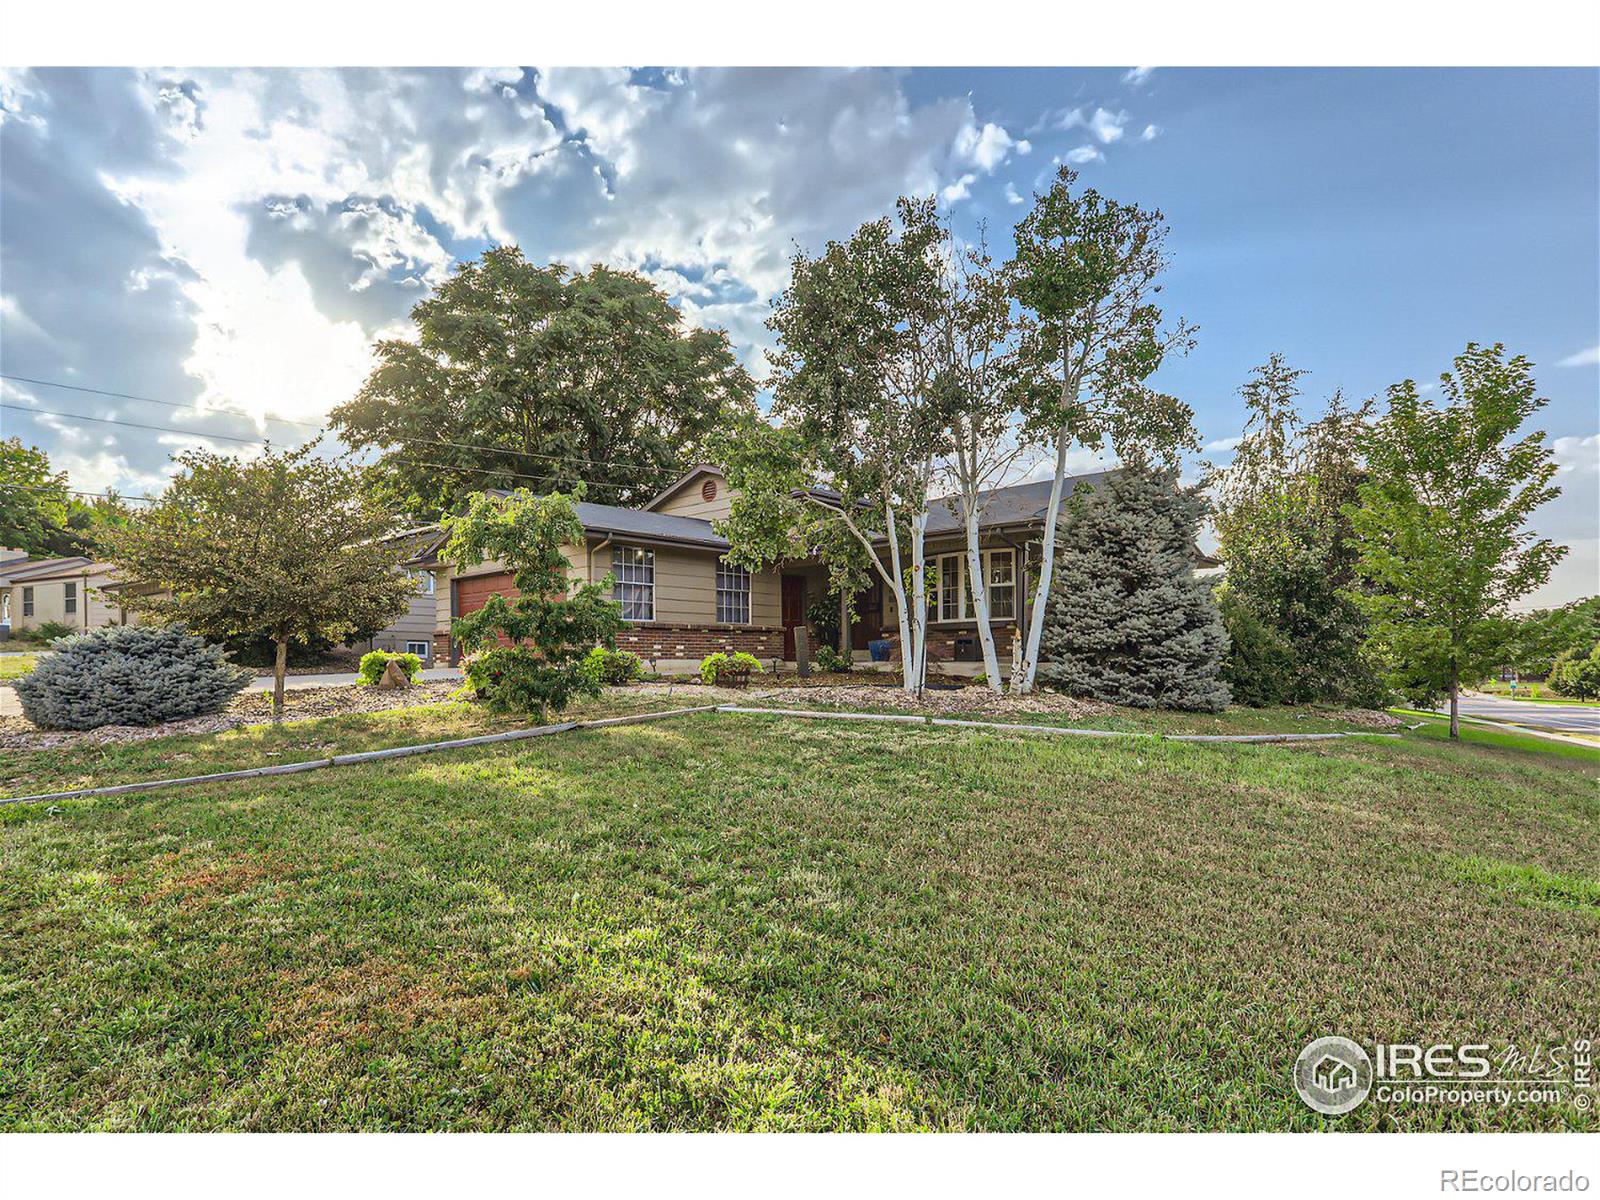 6805 W 76th Place, arvada MLS: 456789999702 Beds: 4 Baths: 3 Price: $640,000